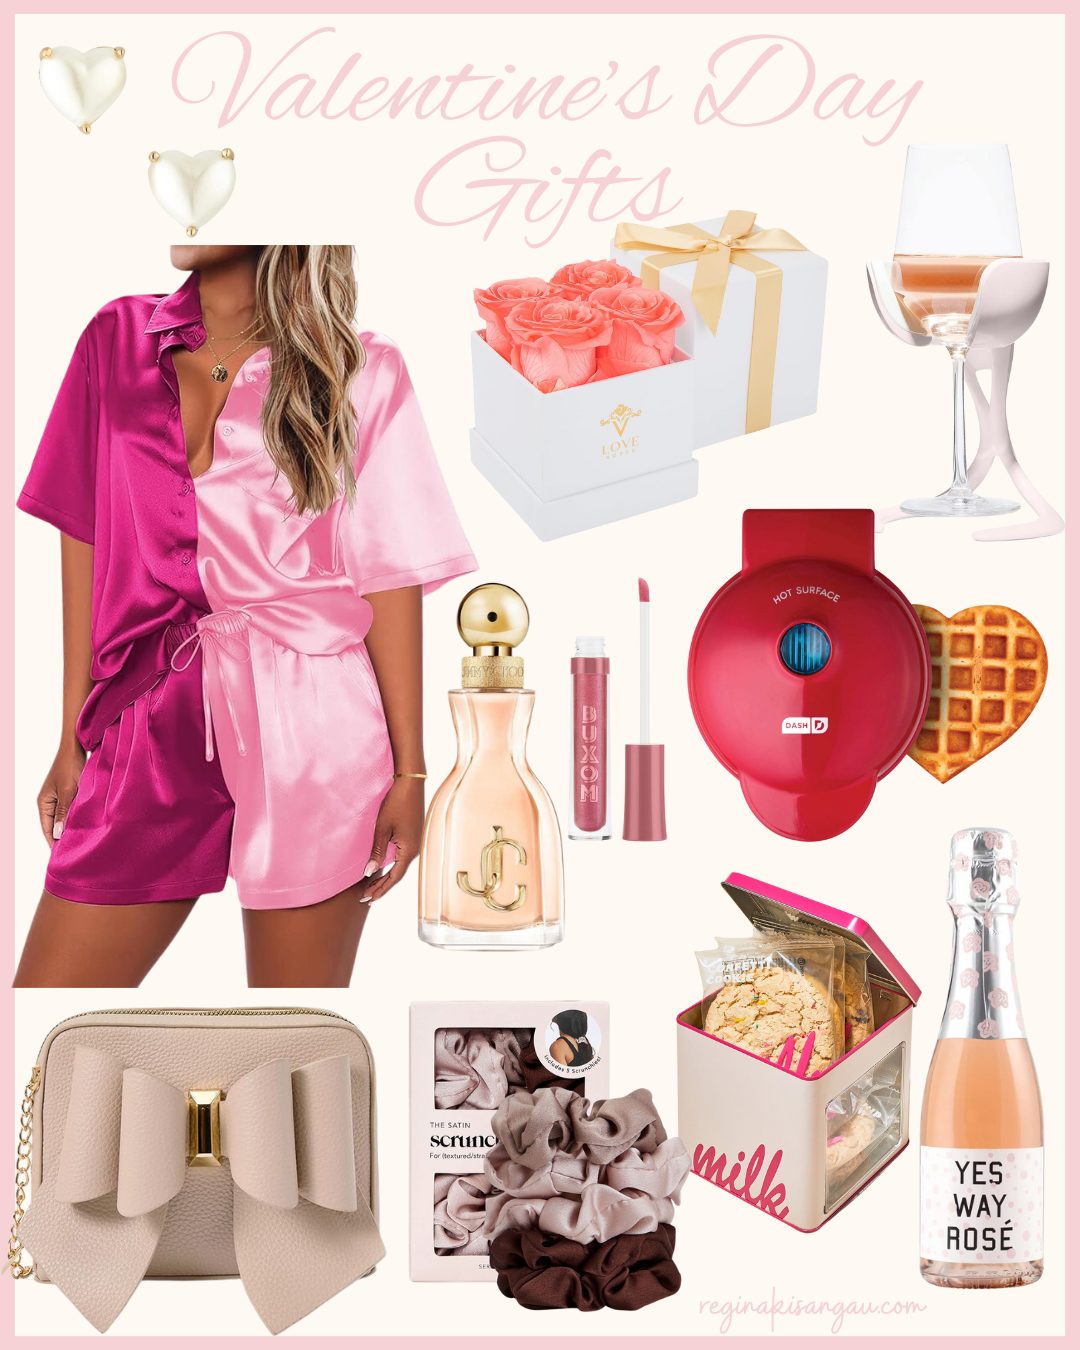 Delightful Valentine’s Day Gifts For Her